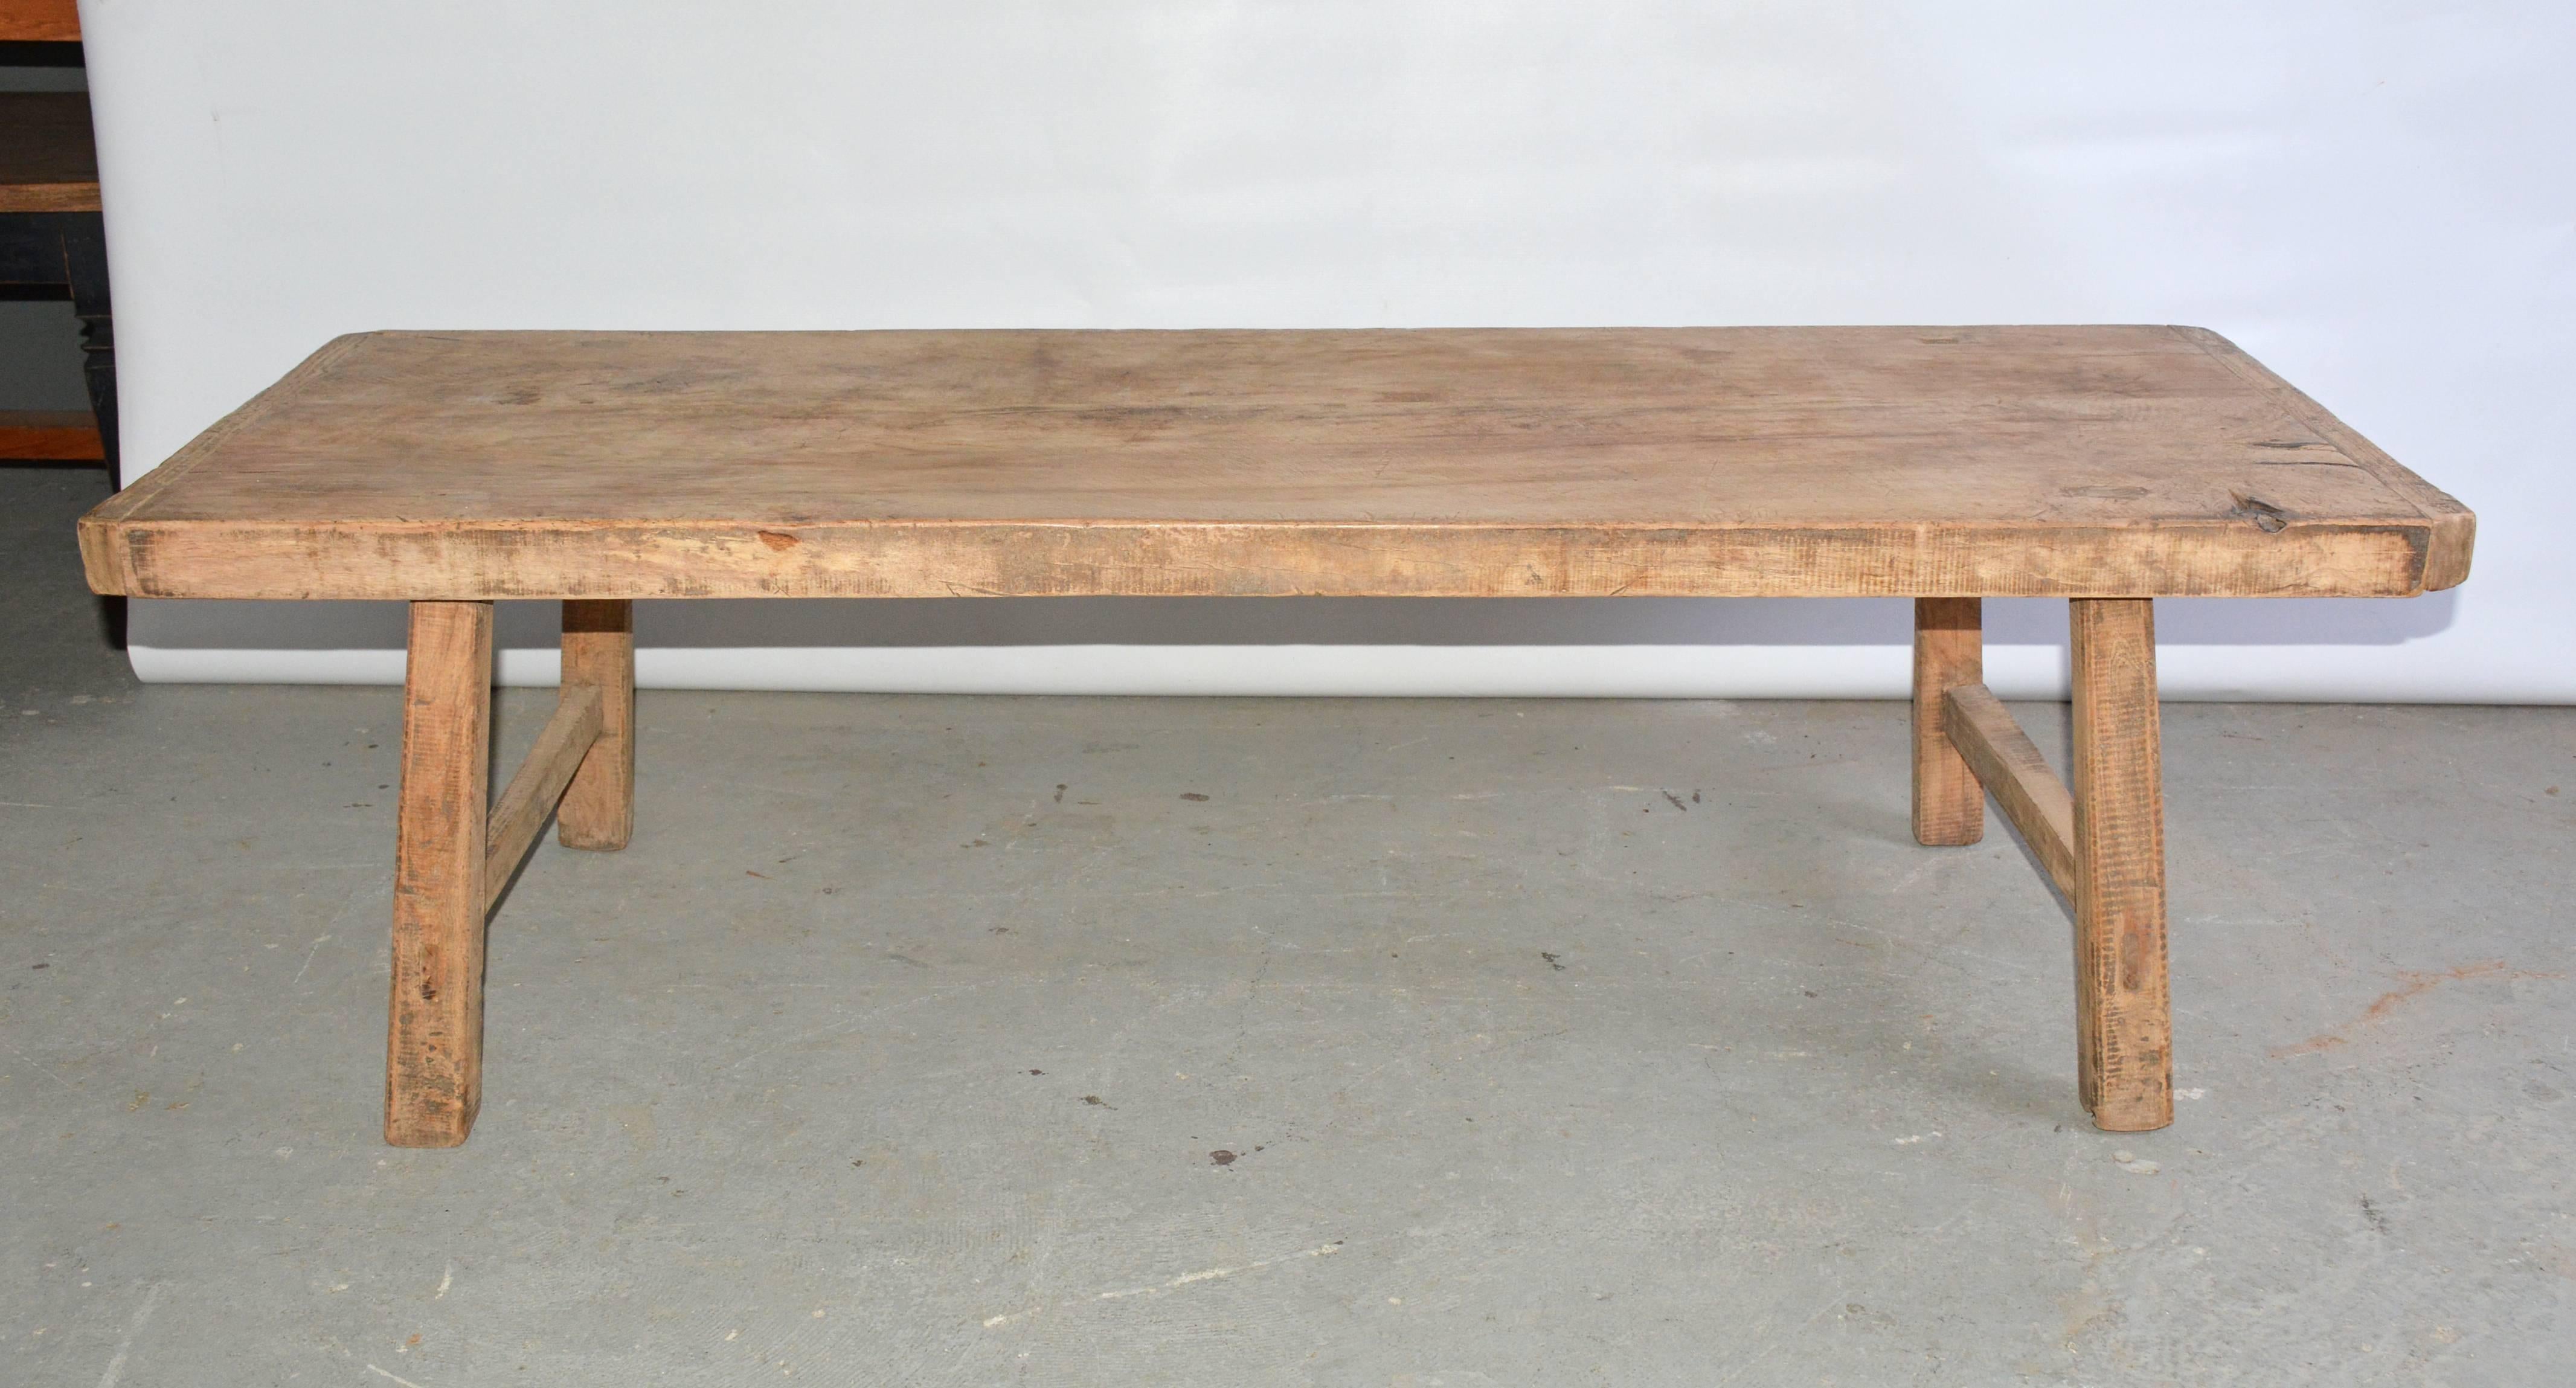 The rustic teak coffee table has angled legs secured with stretchers.